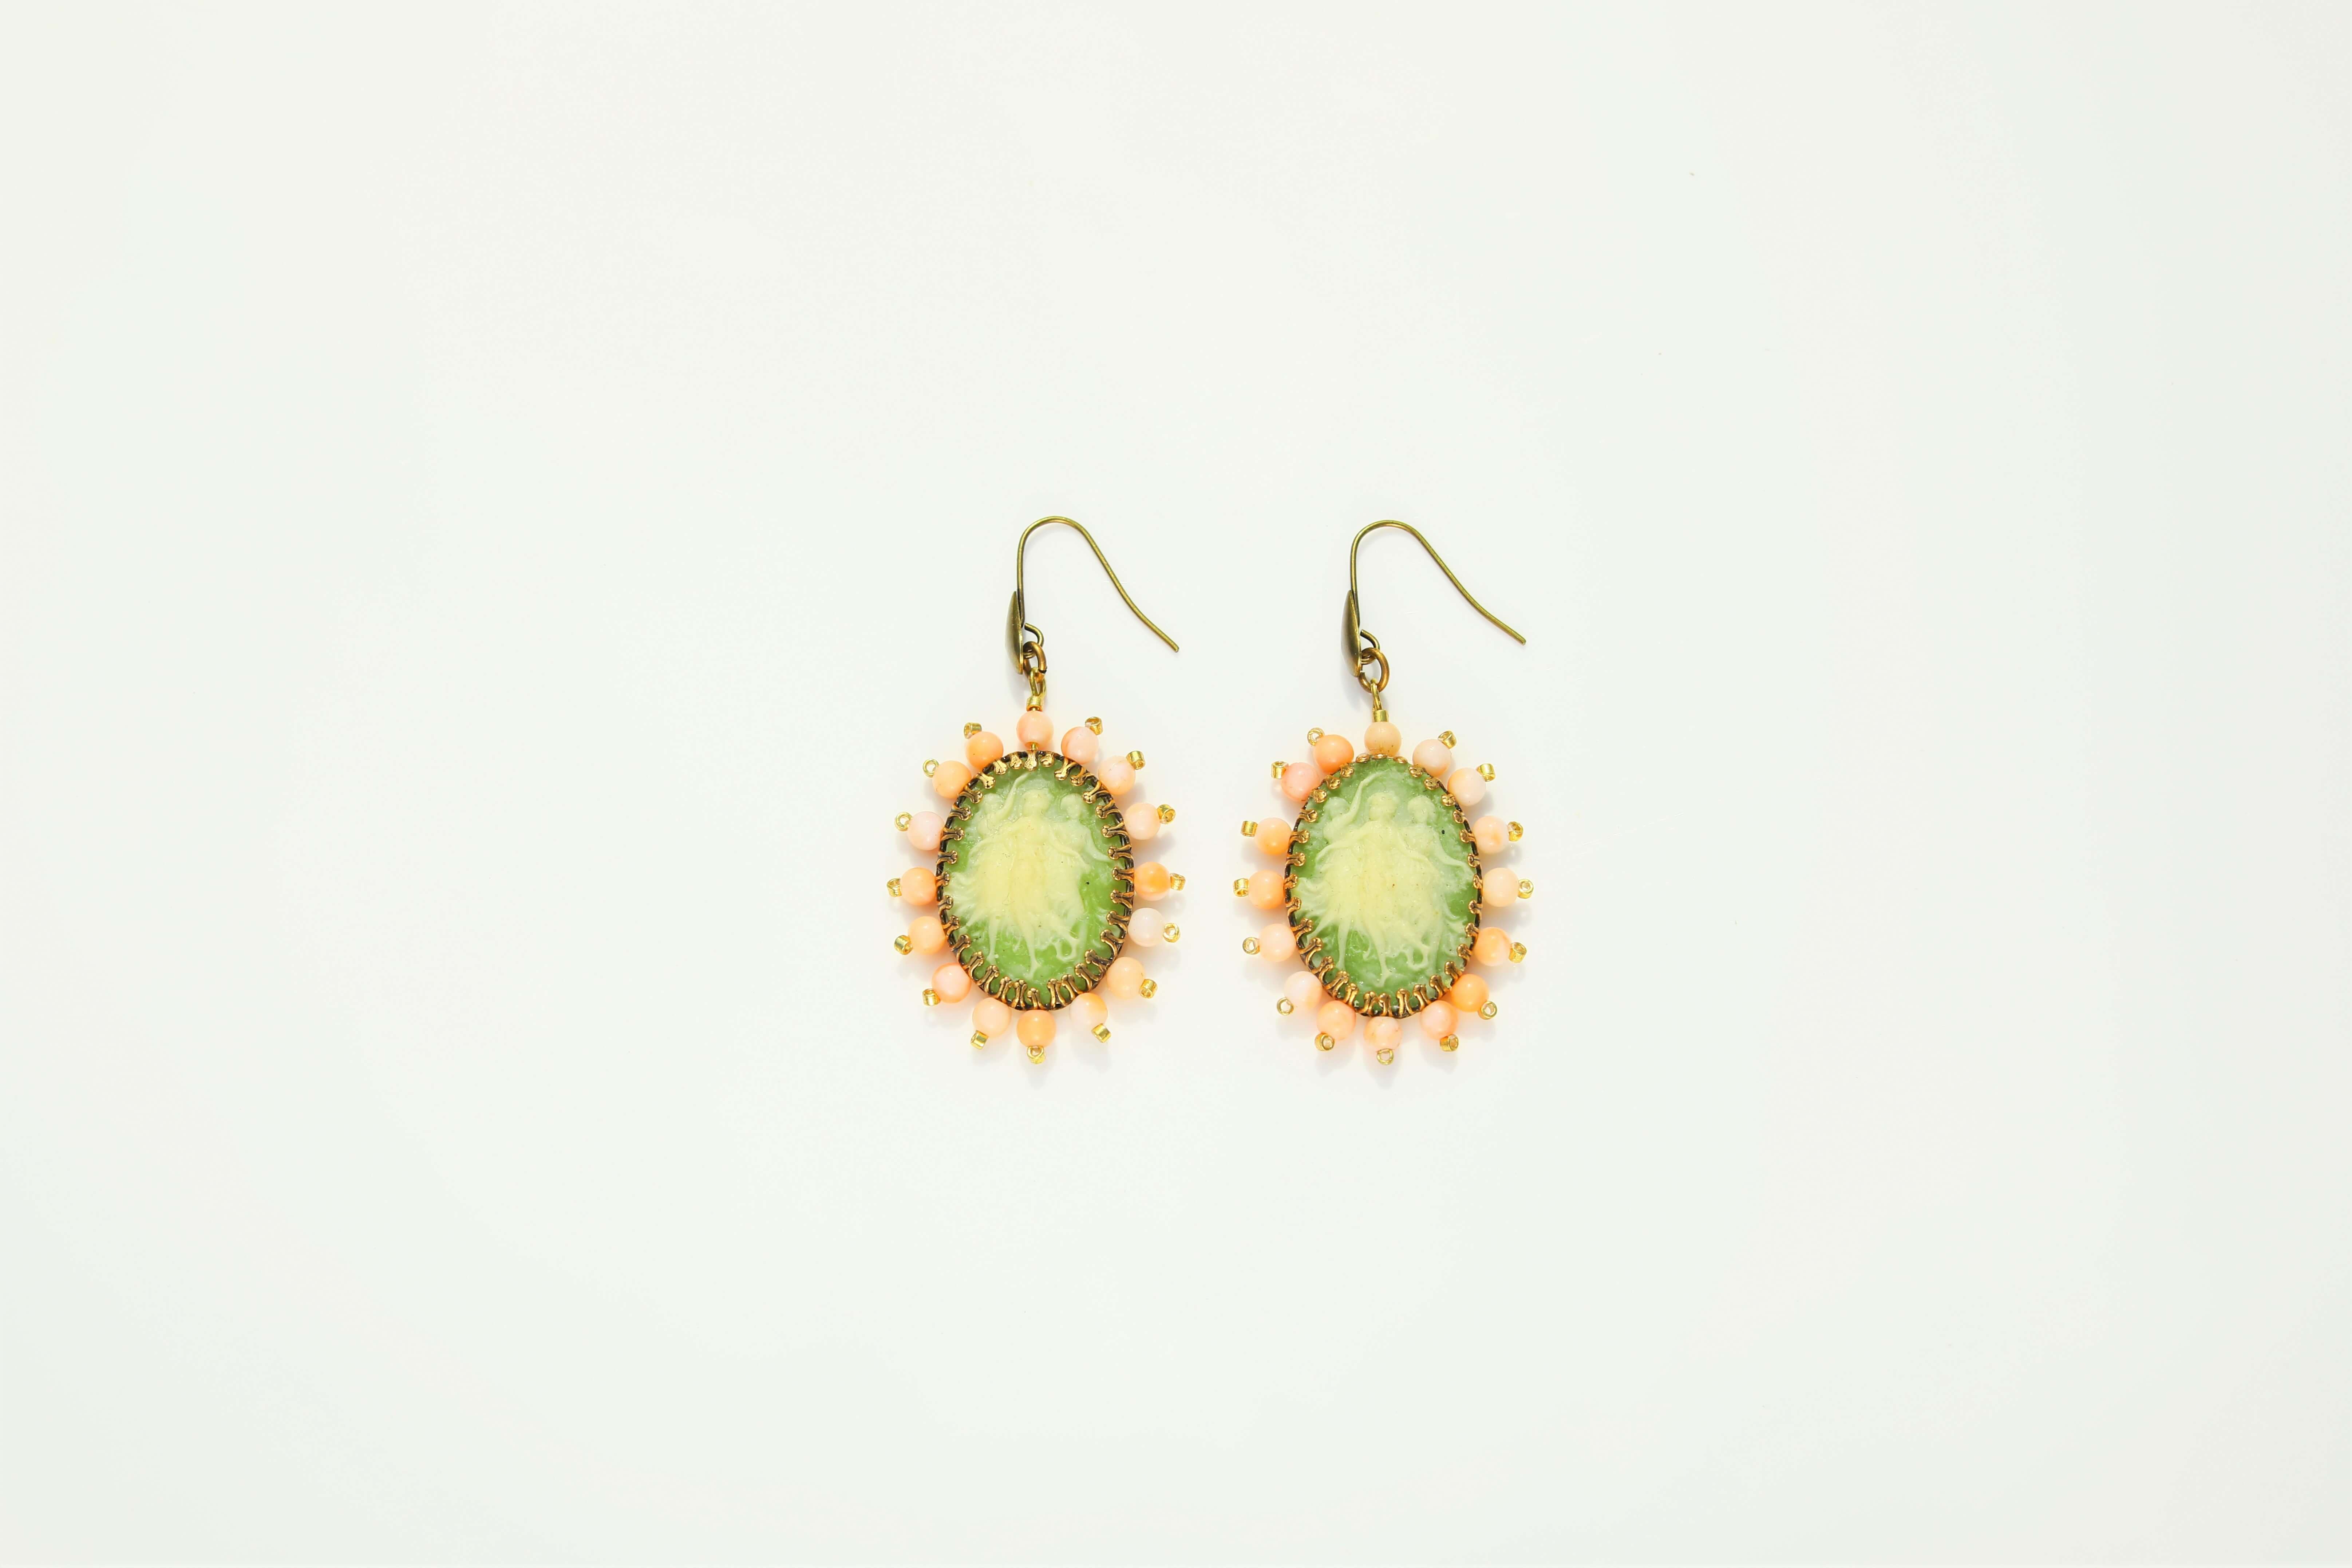 Earrings made of green and pink resin